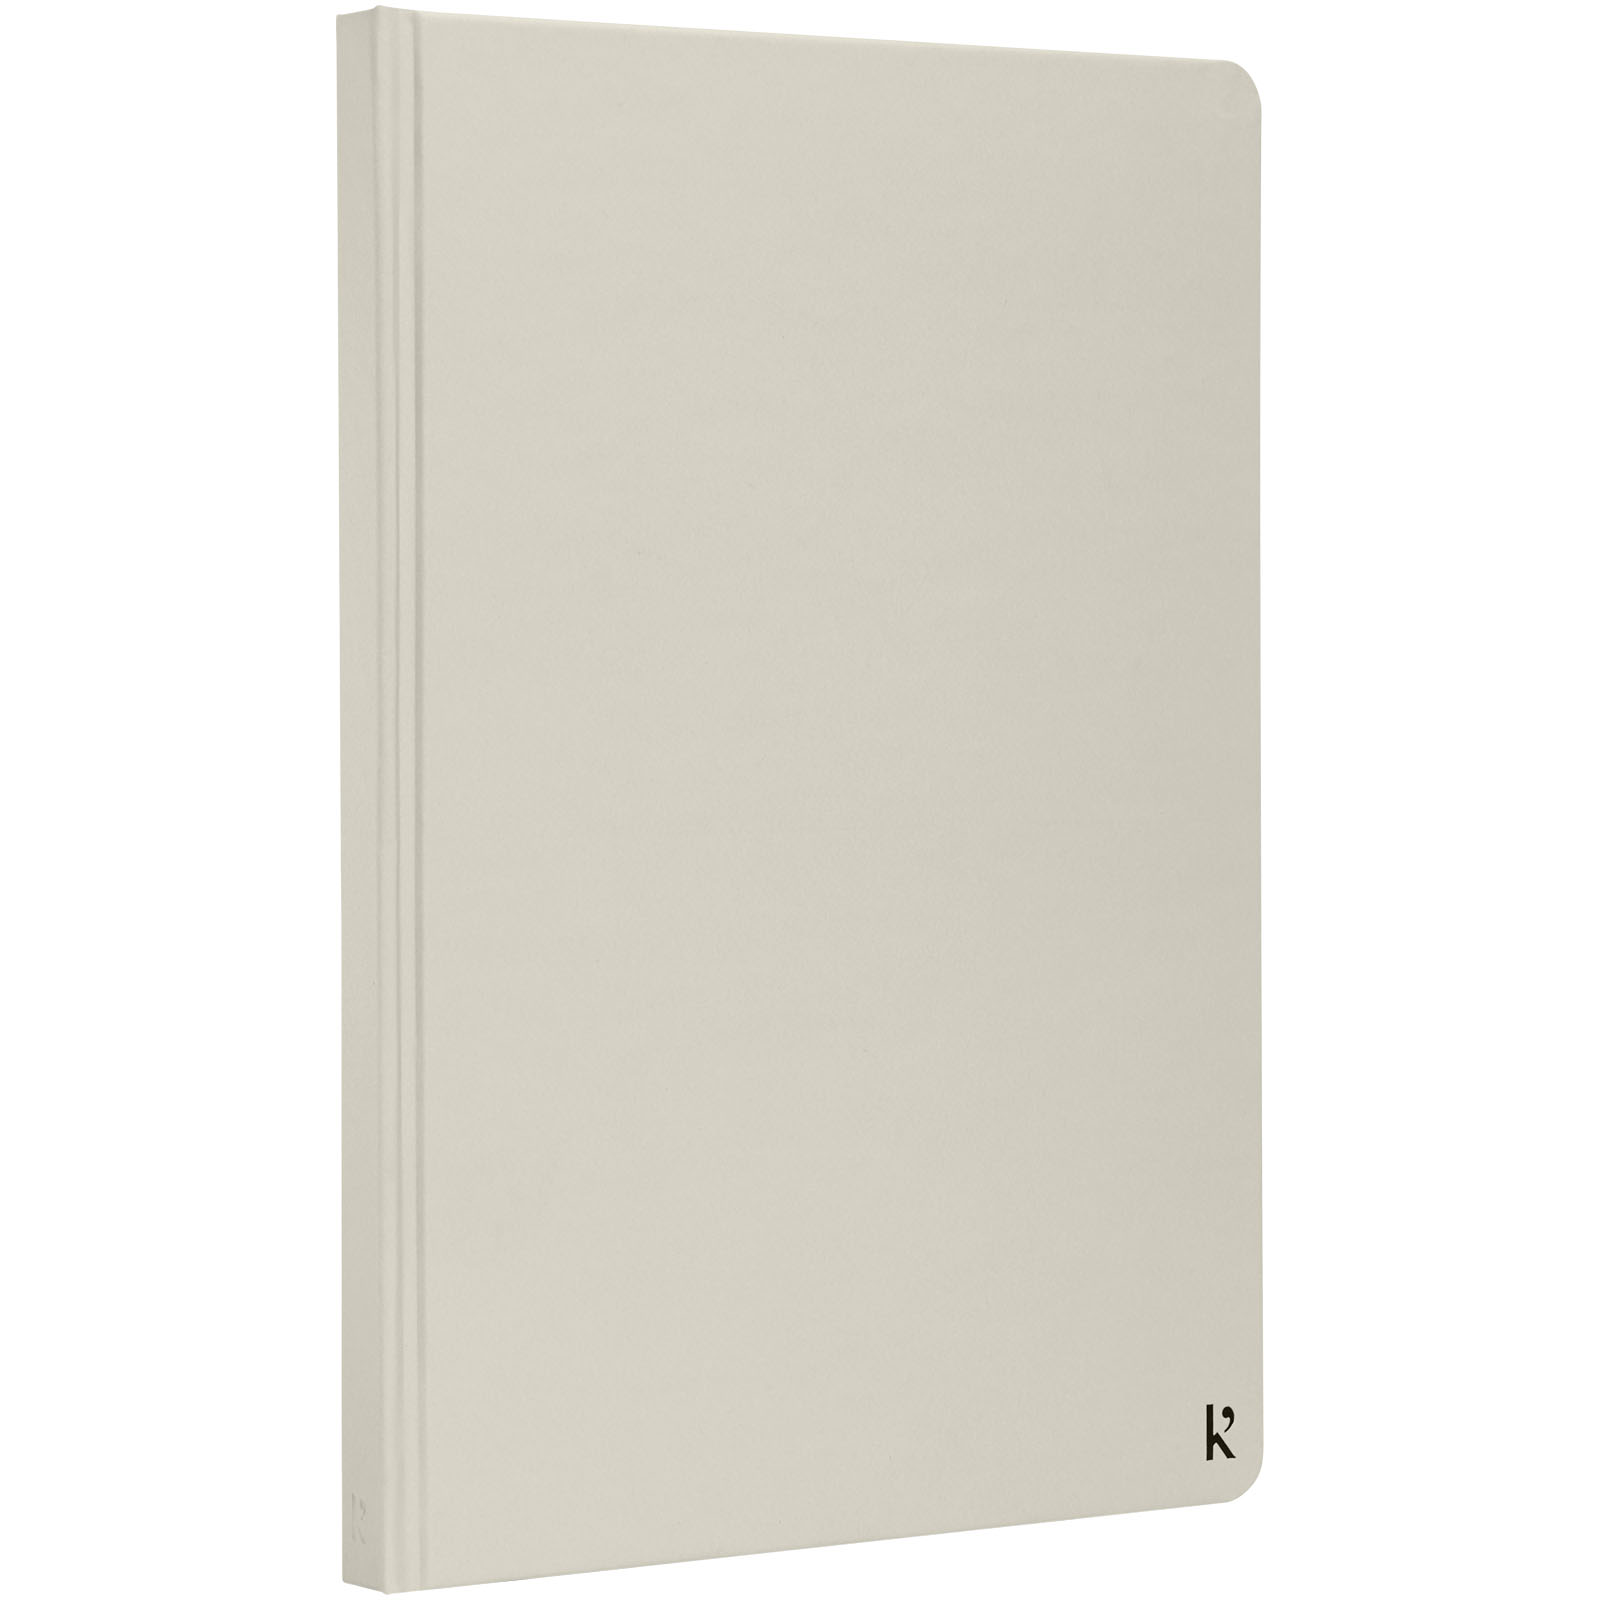 Hard cover notebooks - Karst® A5 stone paper hardcover notebook - lined